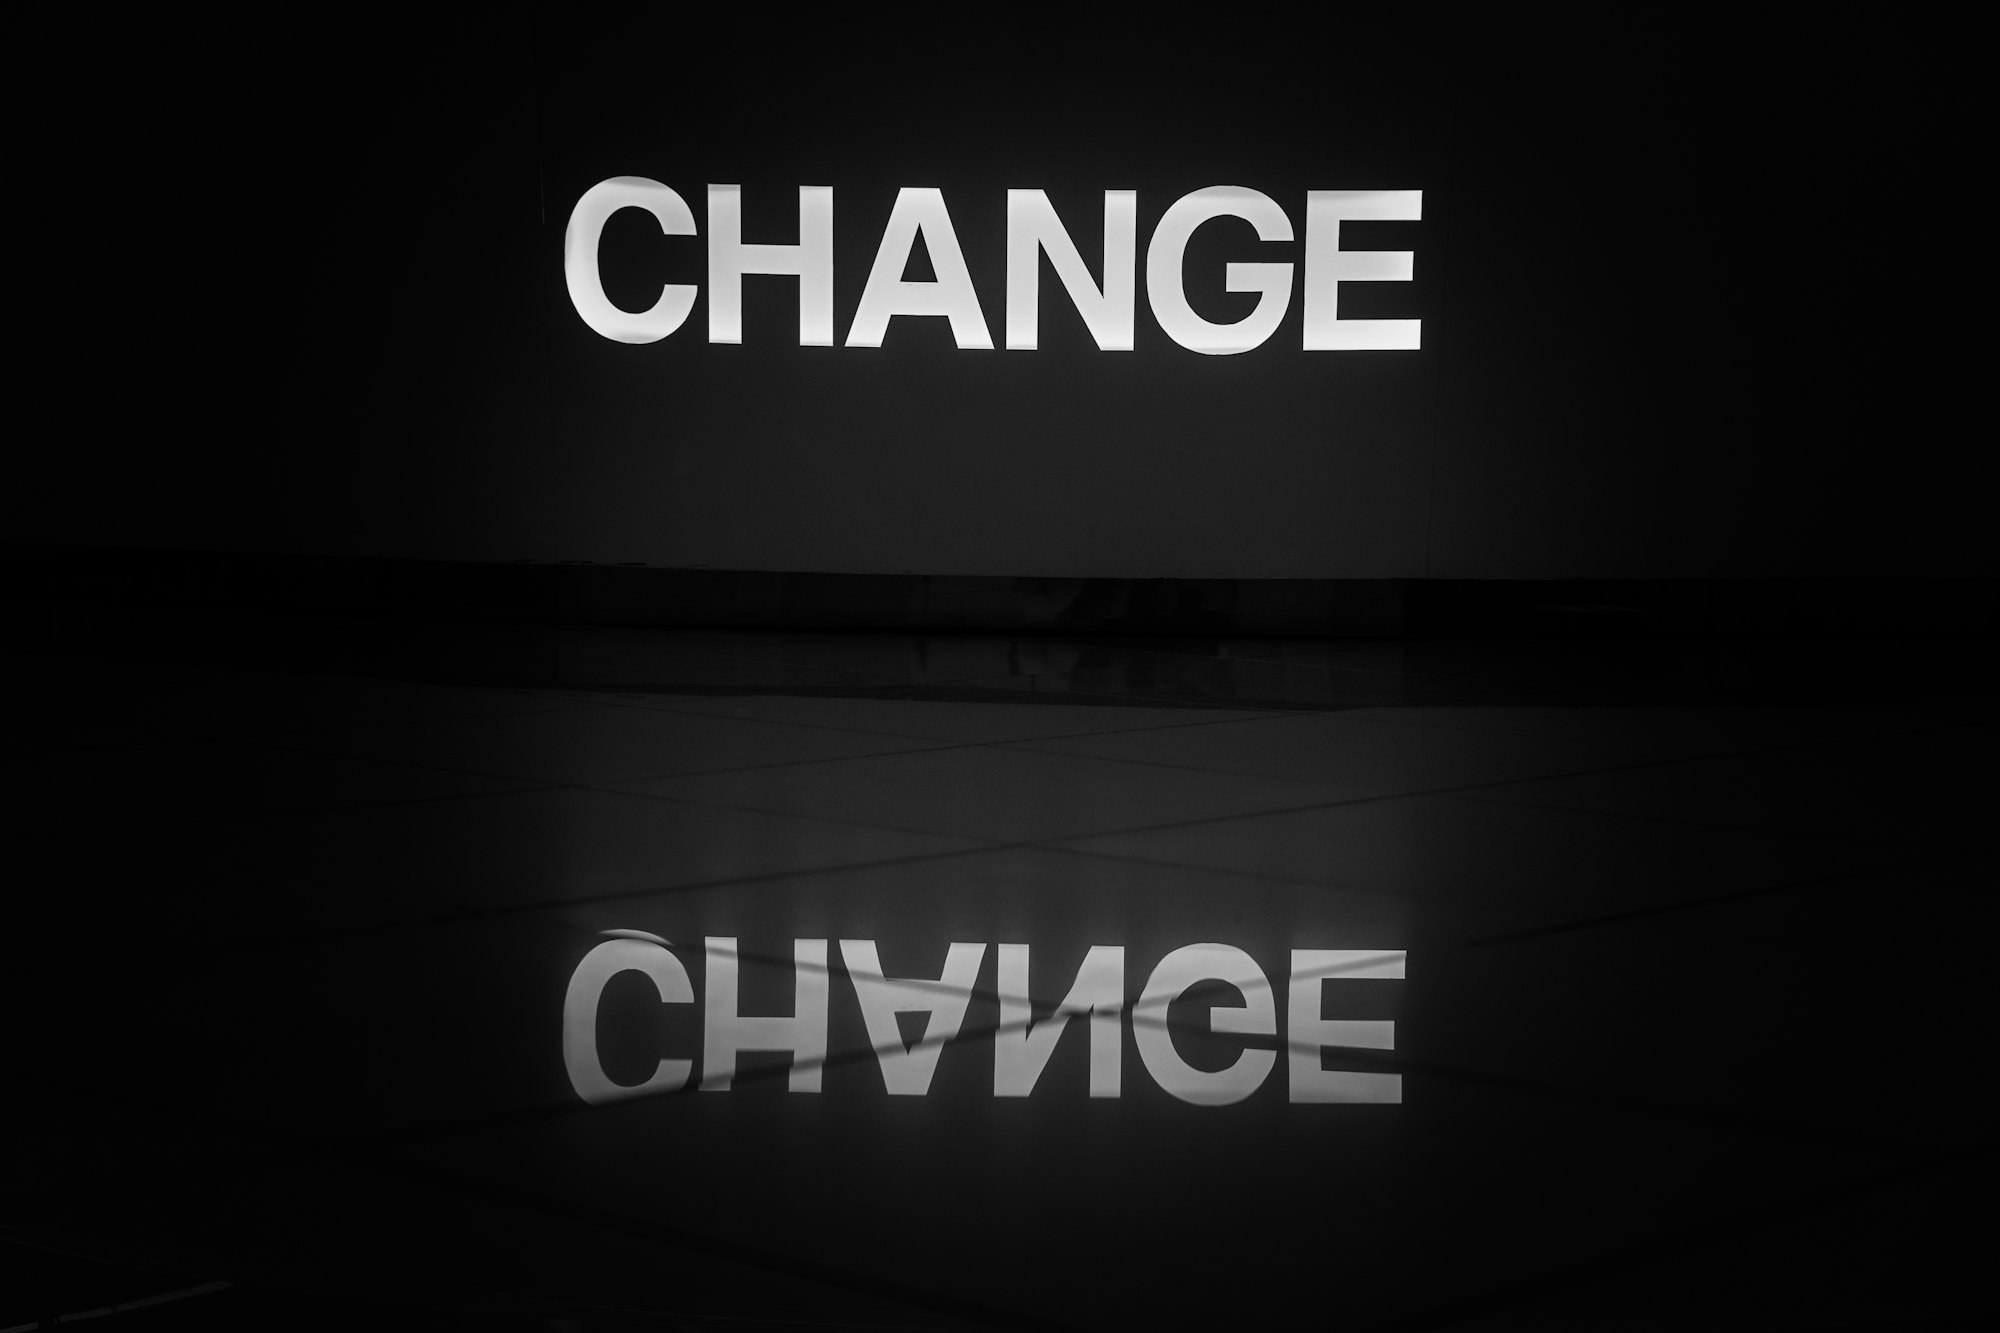 the word "change" in white letters against a dark background reflected on a shiny surface below